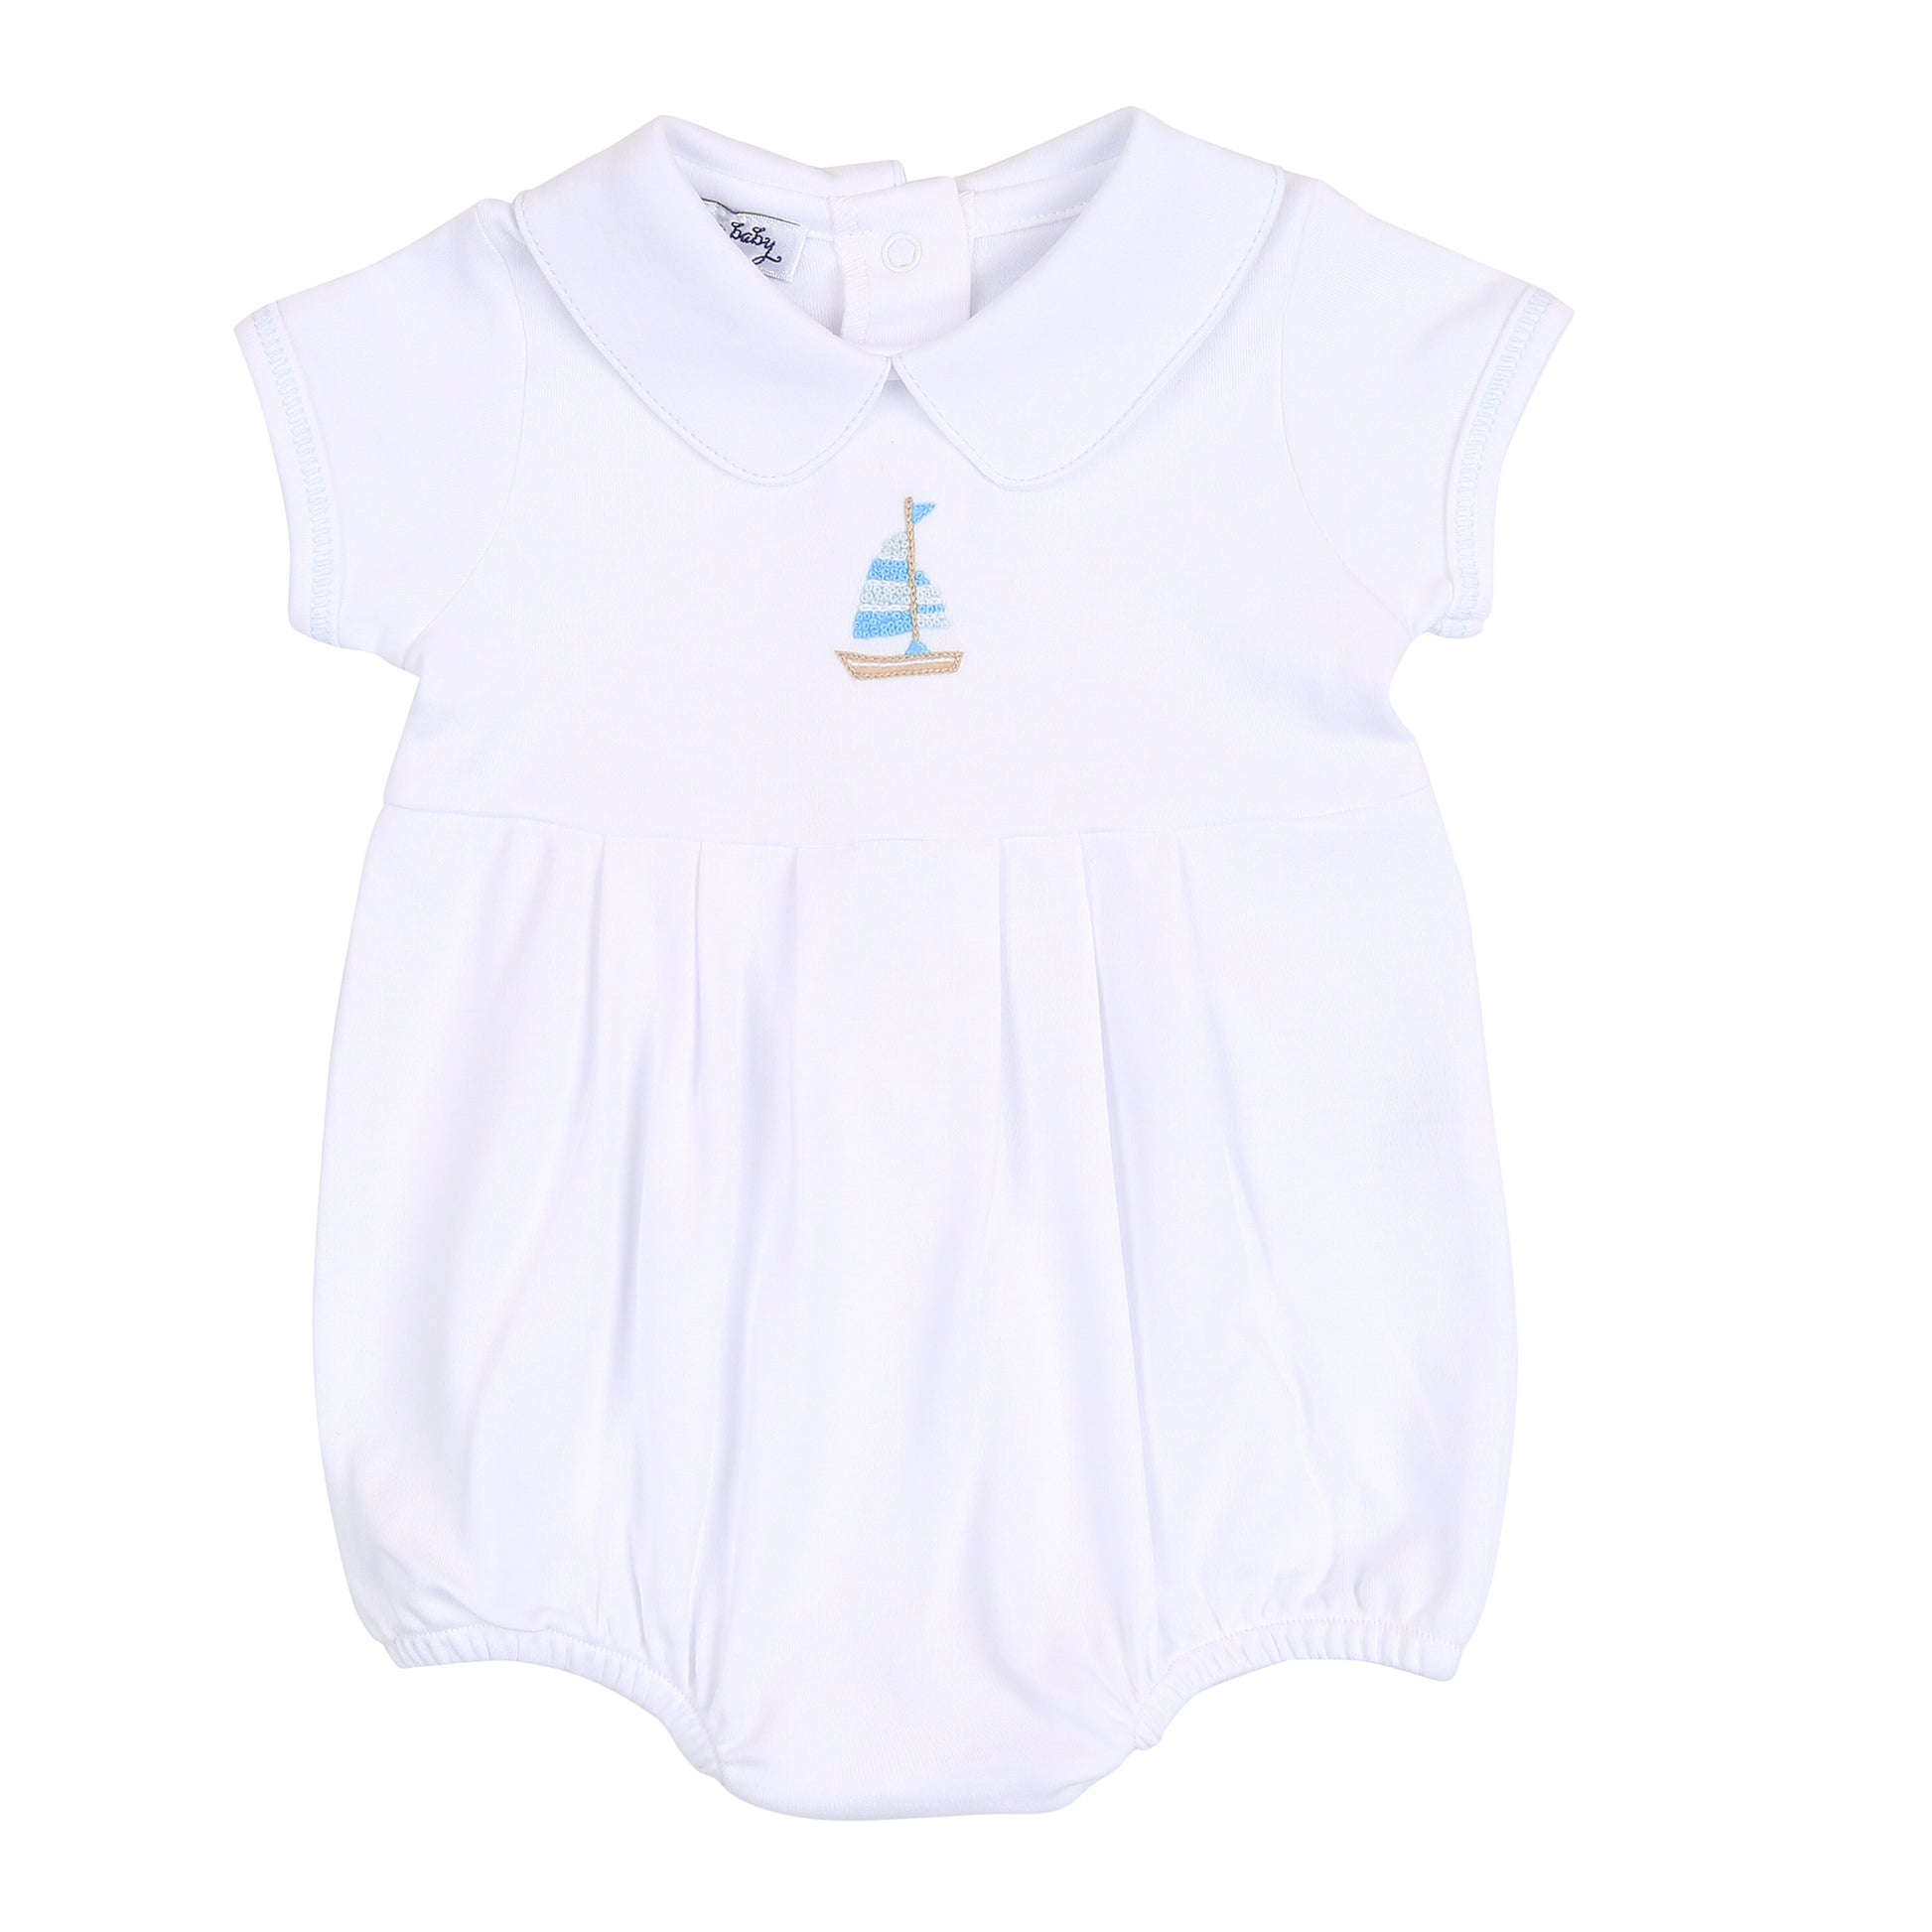 Tiny Sailboat Embroidered Collared Bubble made by Magnolia Baby.